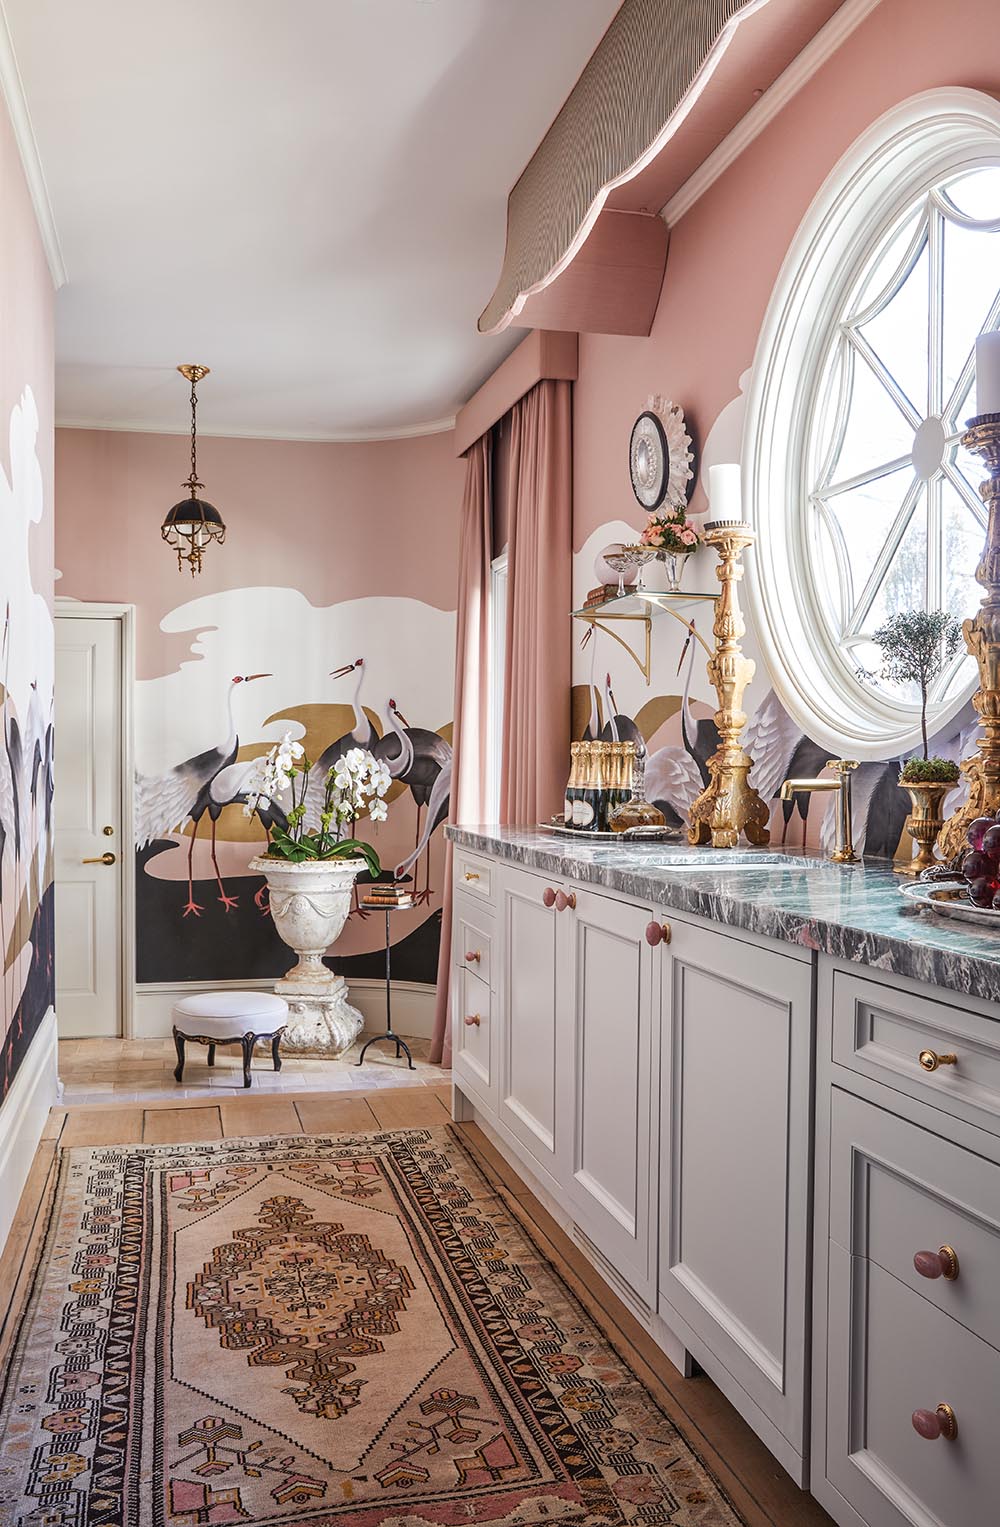 Morning bar in the east gallery with rose colored wallpaper with life-size storks. Arrangement of white orchids in urn sits by the door.